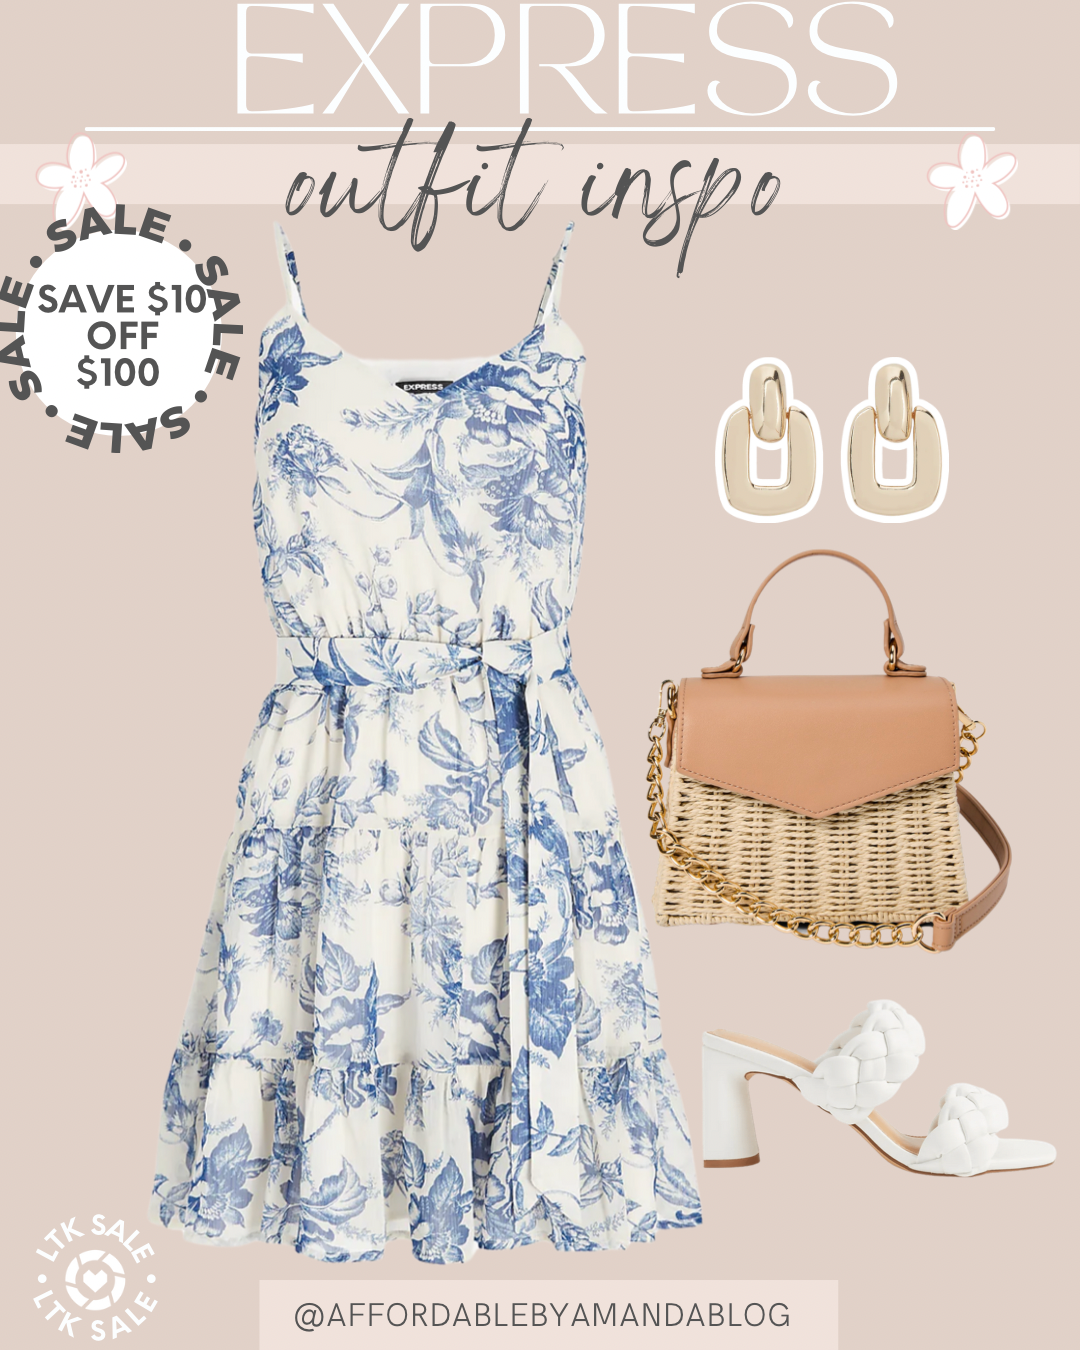 Spring Outfits from Express 2022 - Dresses from Express - Express Dresses on Sale 